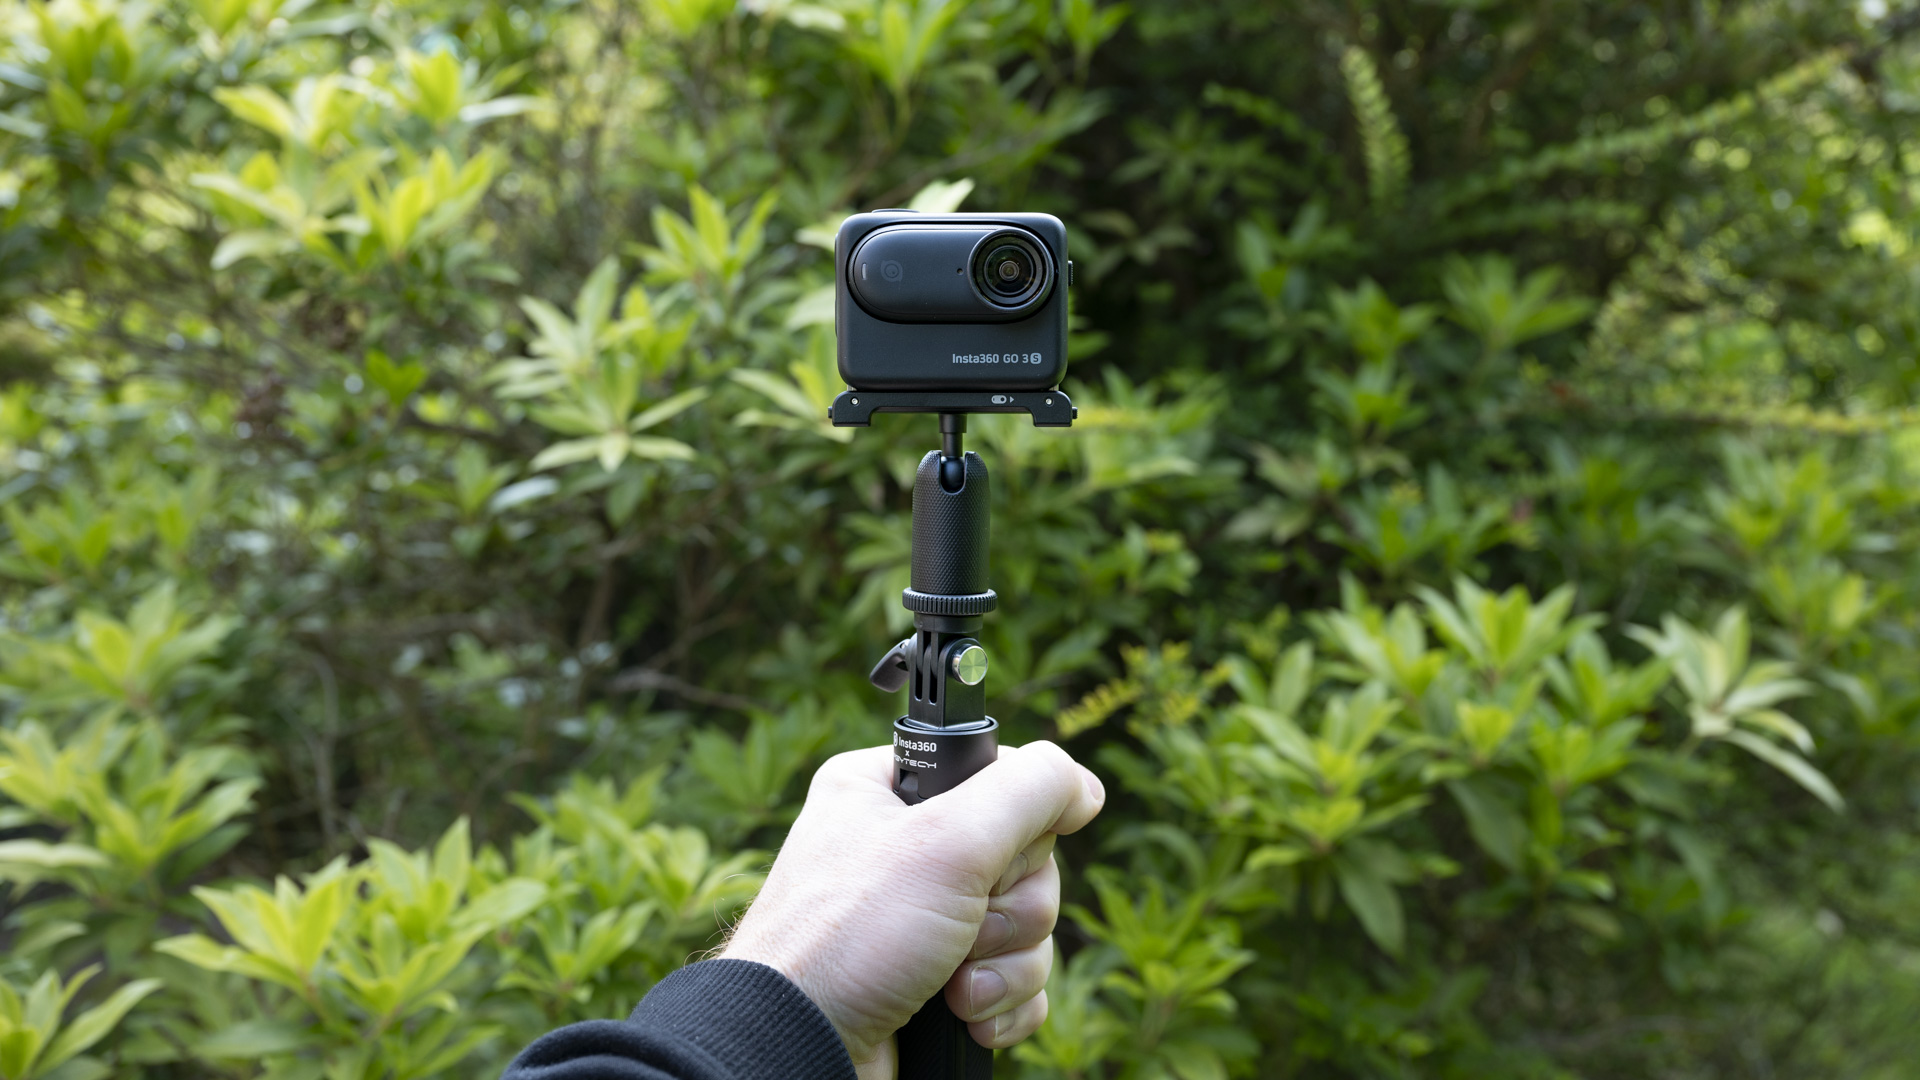 Insta360 Go 3S camera in its housing attached to a selfie stick, outdoors